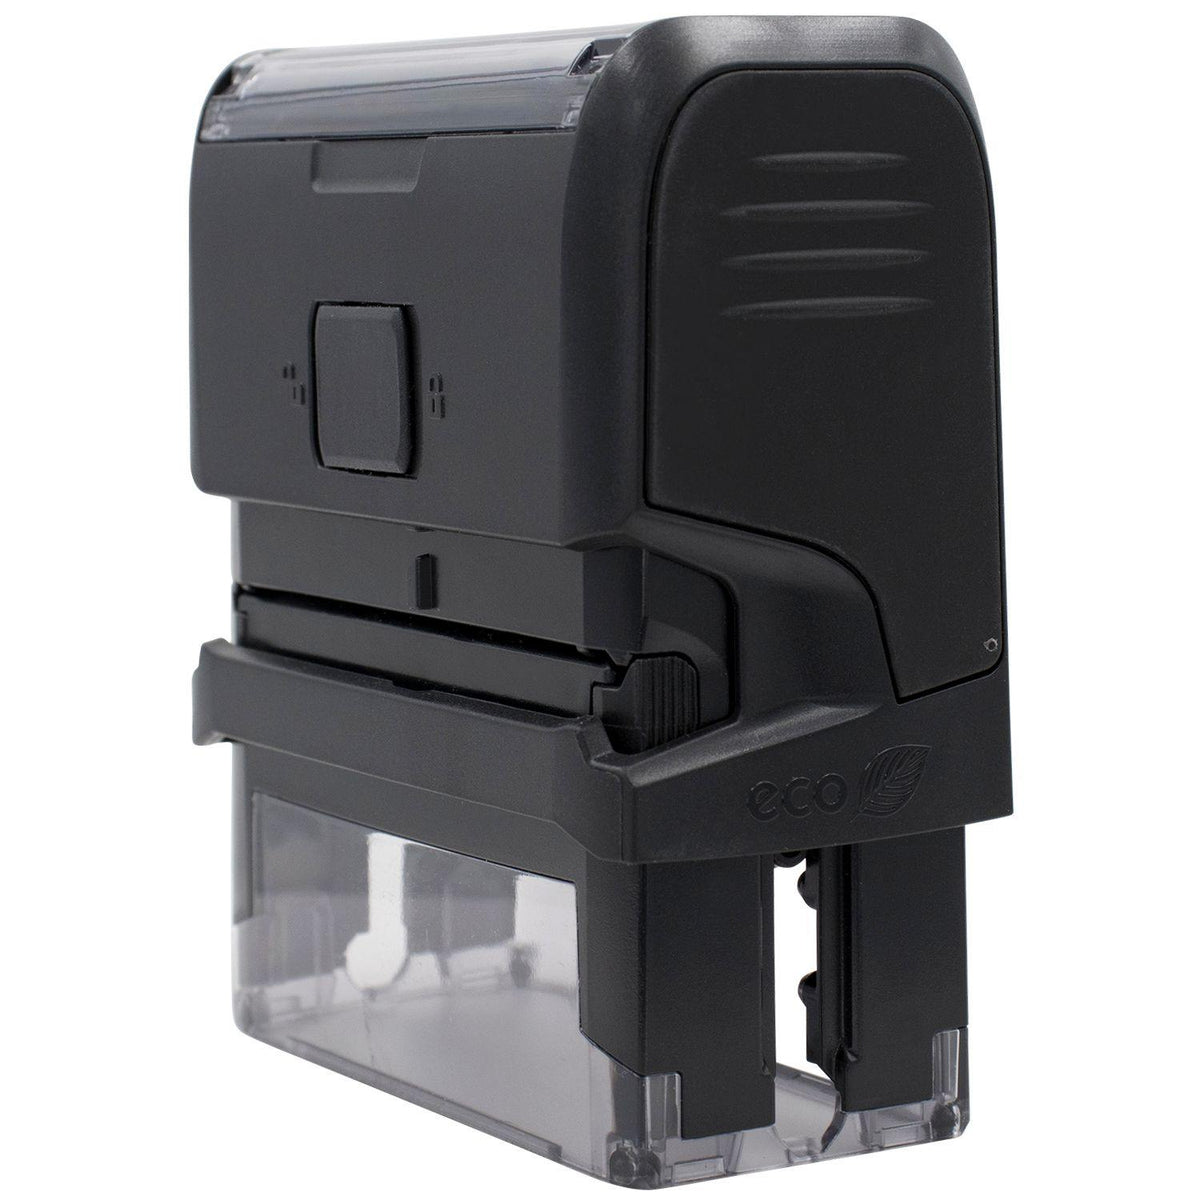 Side View of Large Self Inking Bc Bs Stamp at an Angle